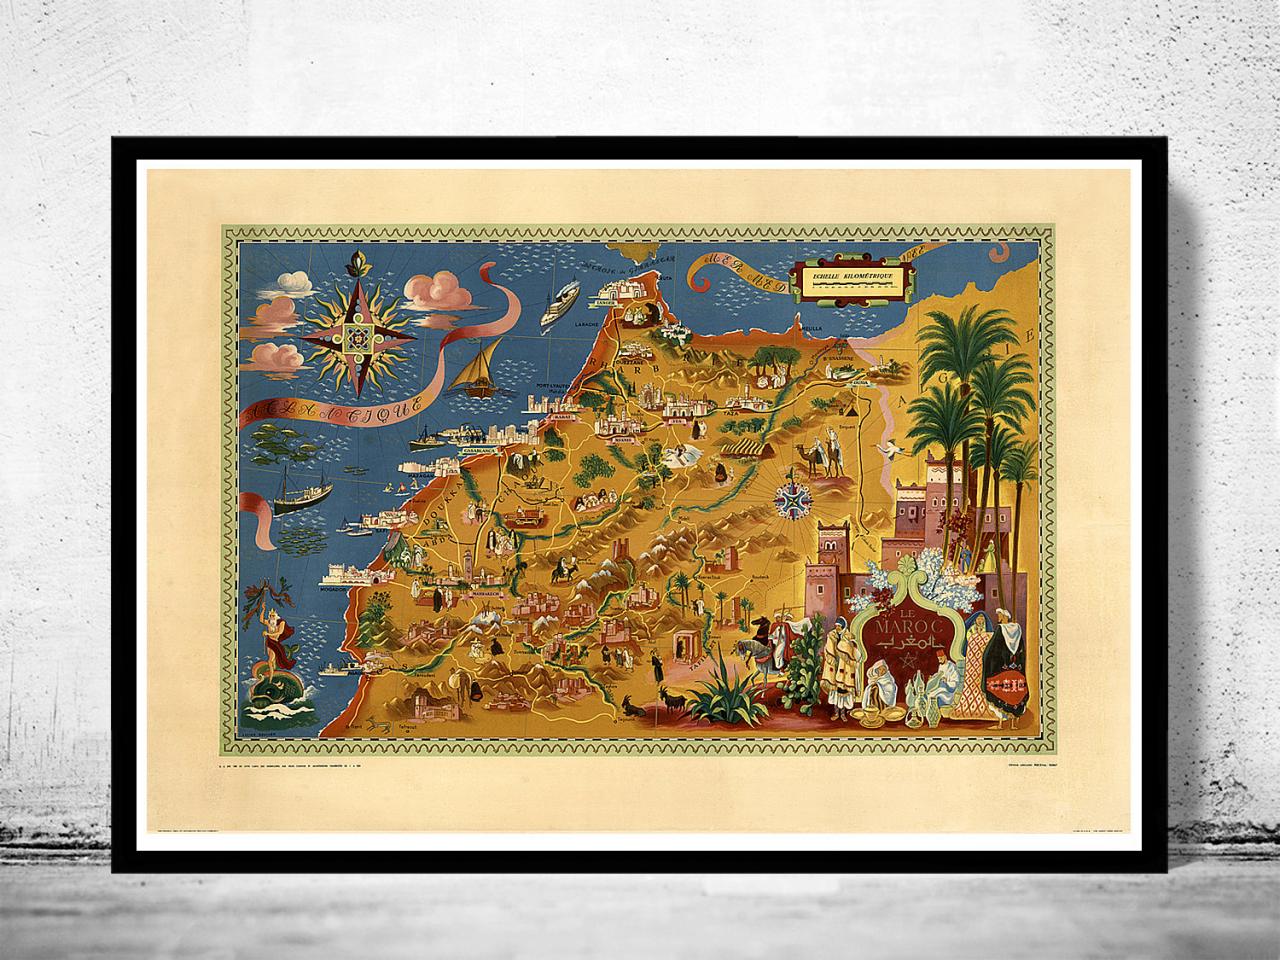 Old Map of Morocco Le Maroc Vintage Map